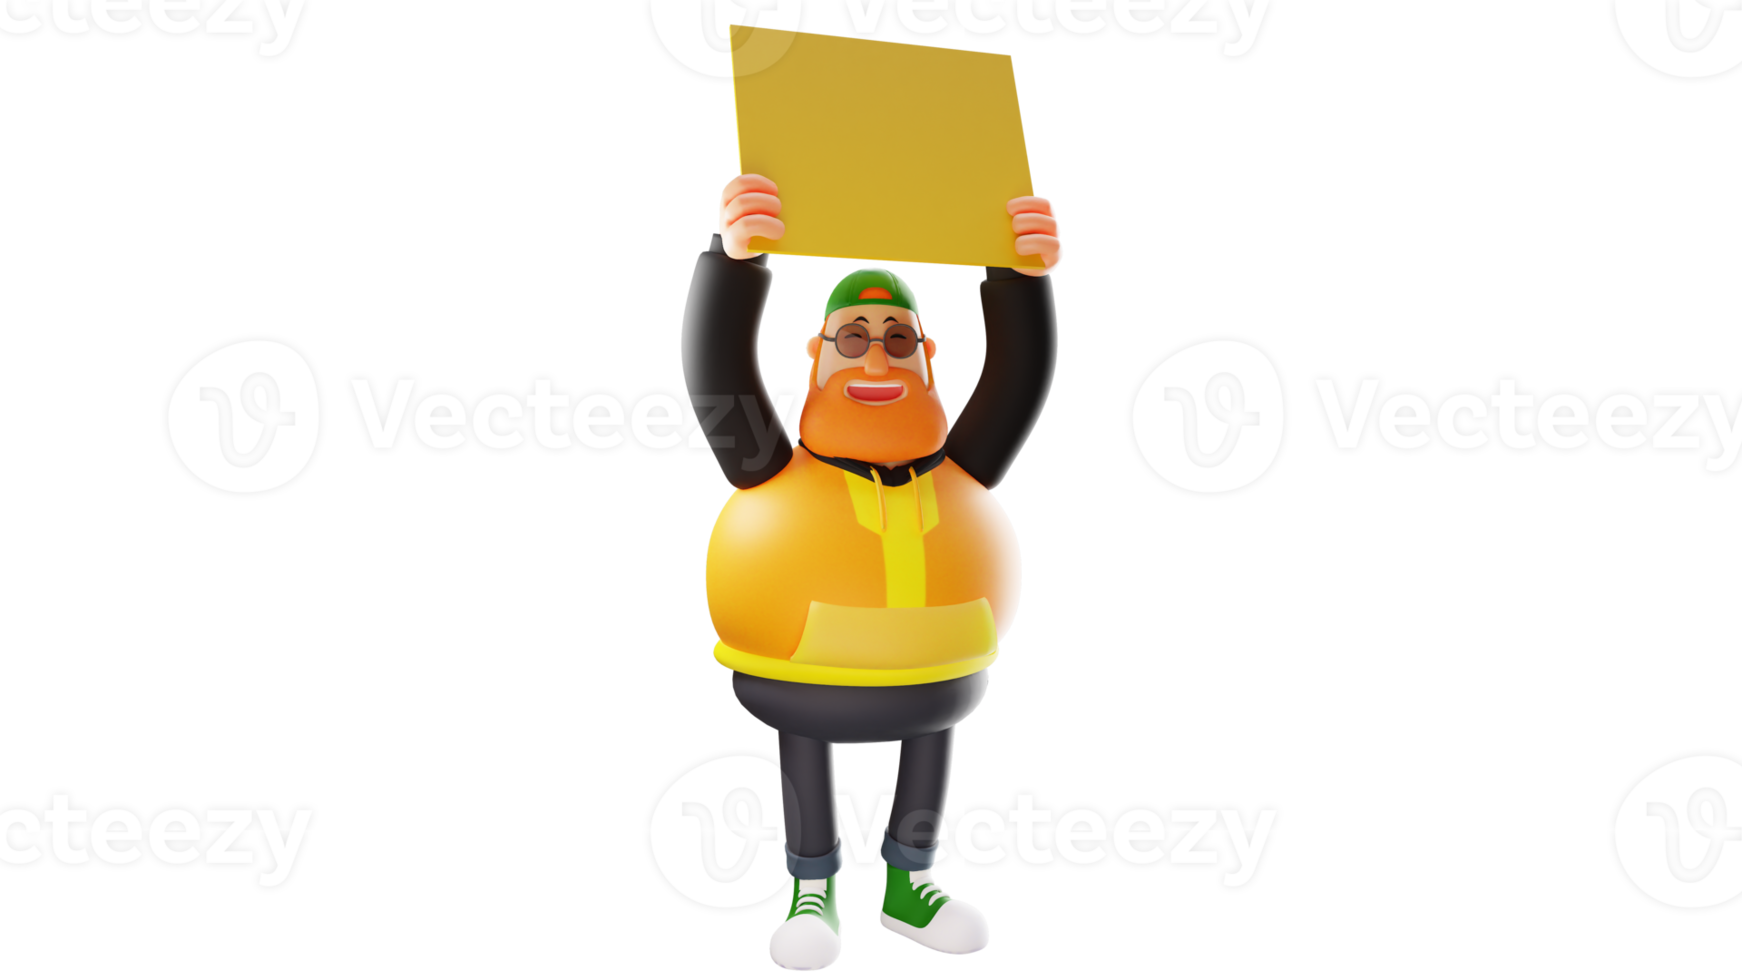 3D illustration. Excited Fat Man 3D Cartoon Character. A stylish man smiling happily. Fat man holds up a yellow board. 3D Cartoon Character png